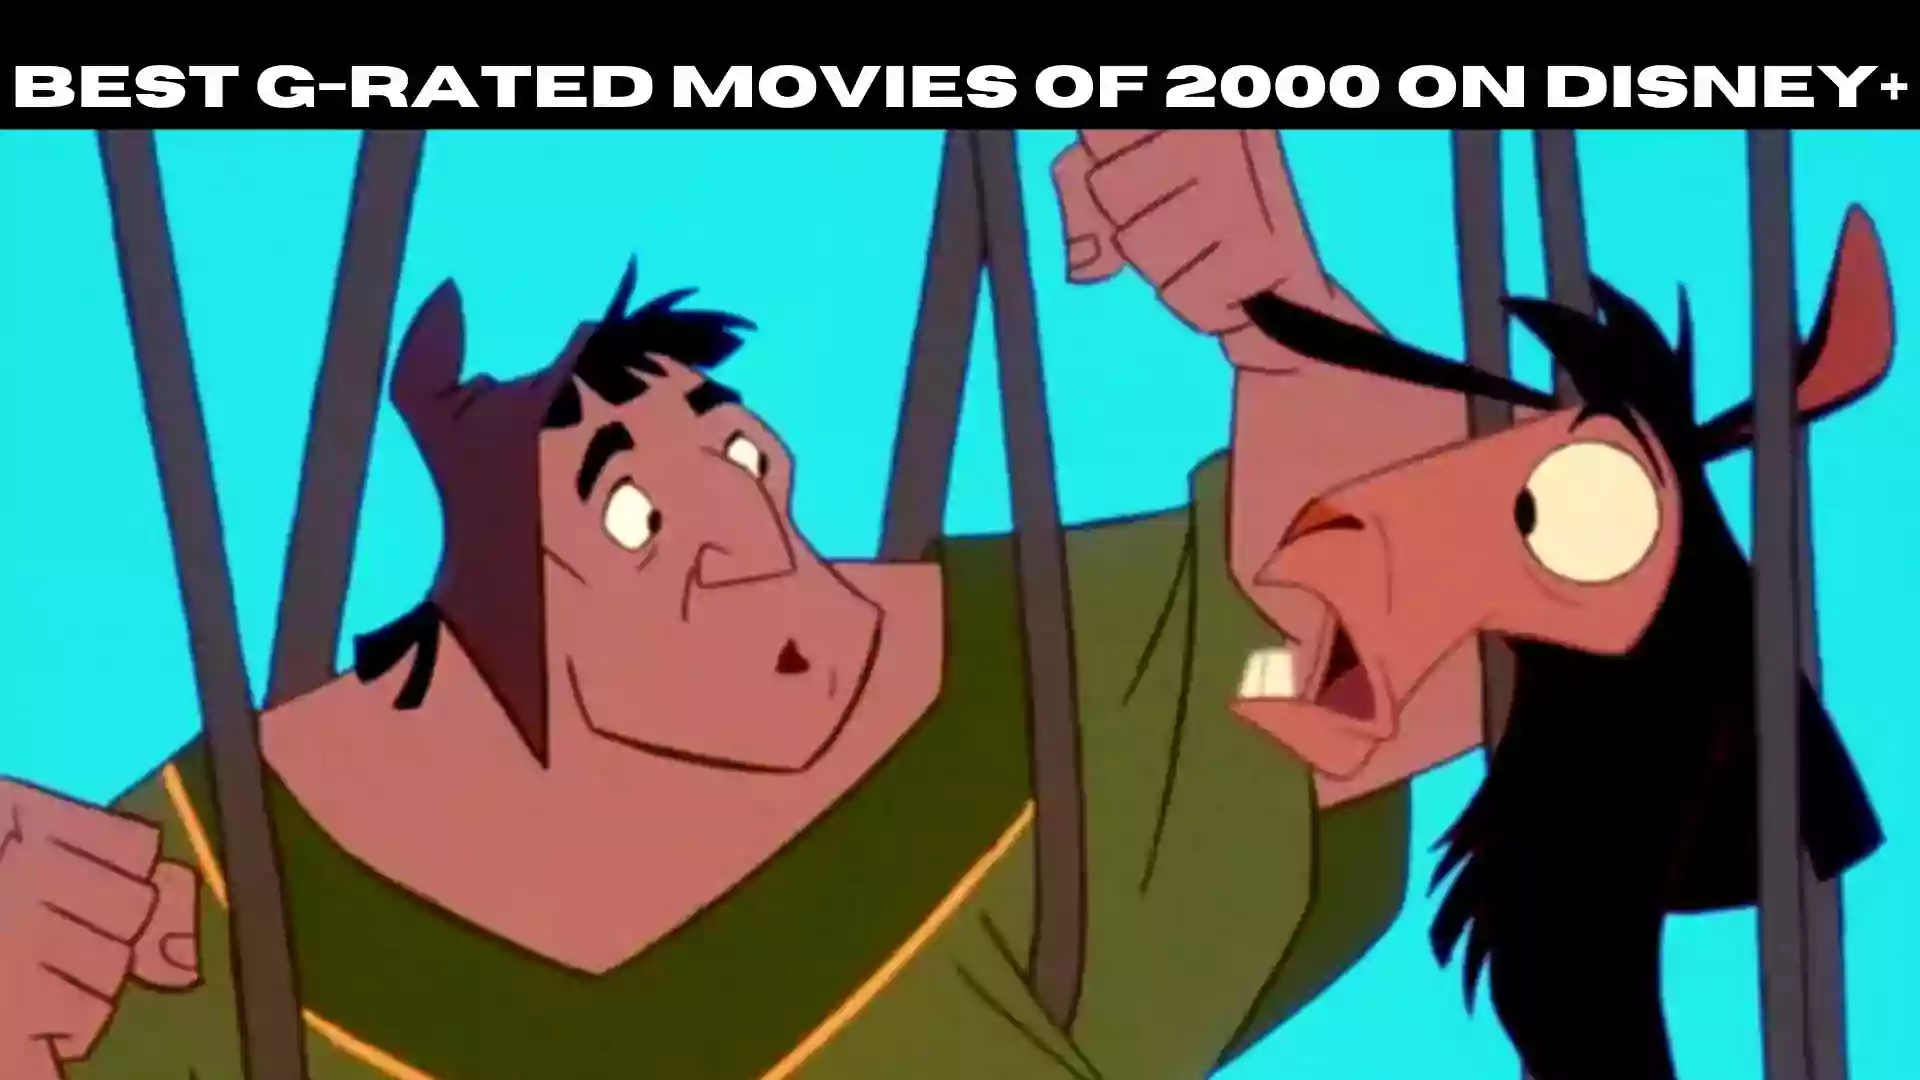 Best G-Rated Movies of 2000 on Disney+